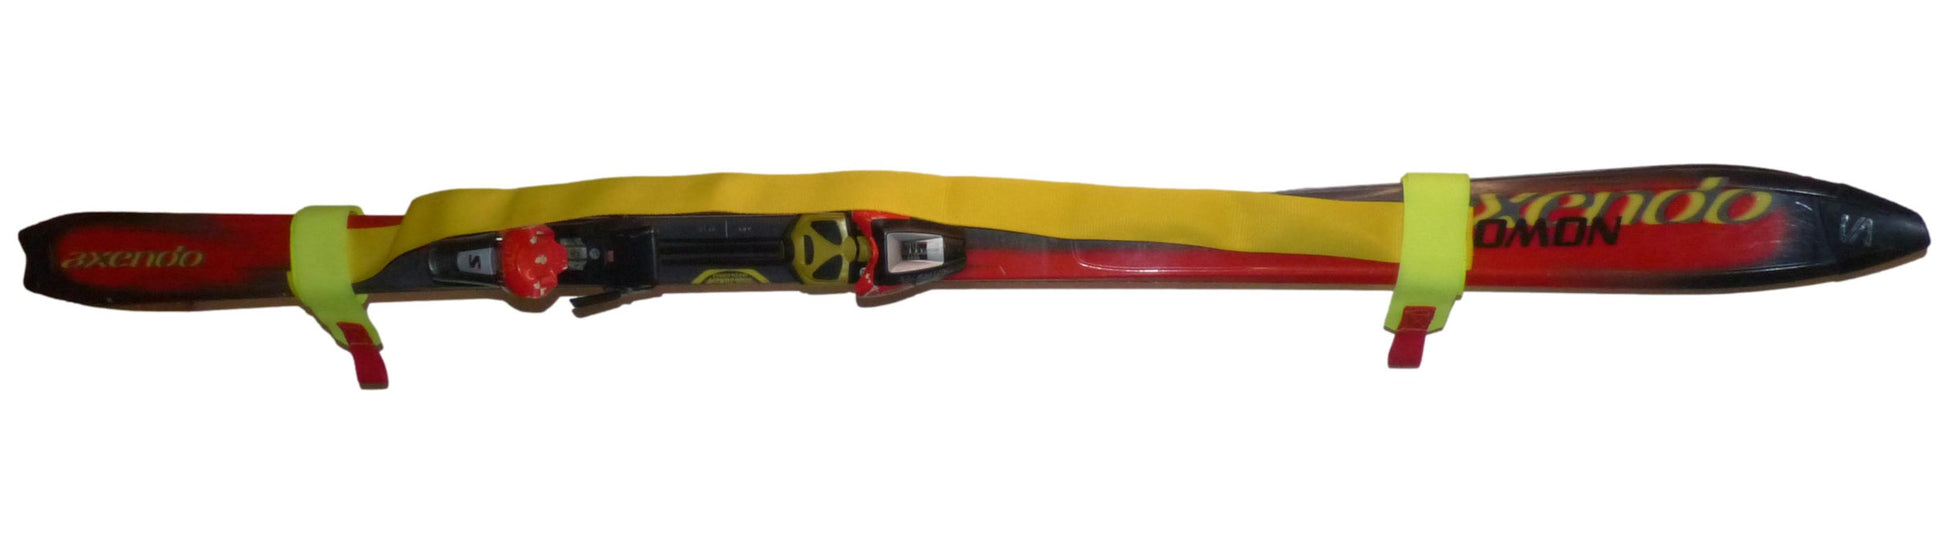 Benristraps Ski and Pole Carry Strap in yellow  on skis